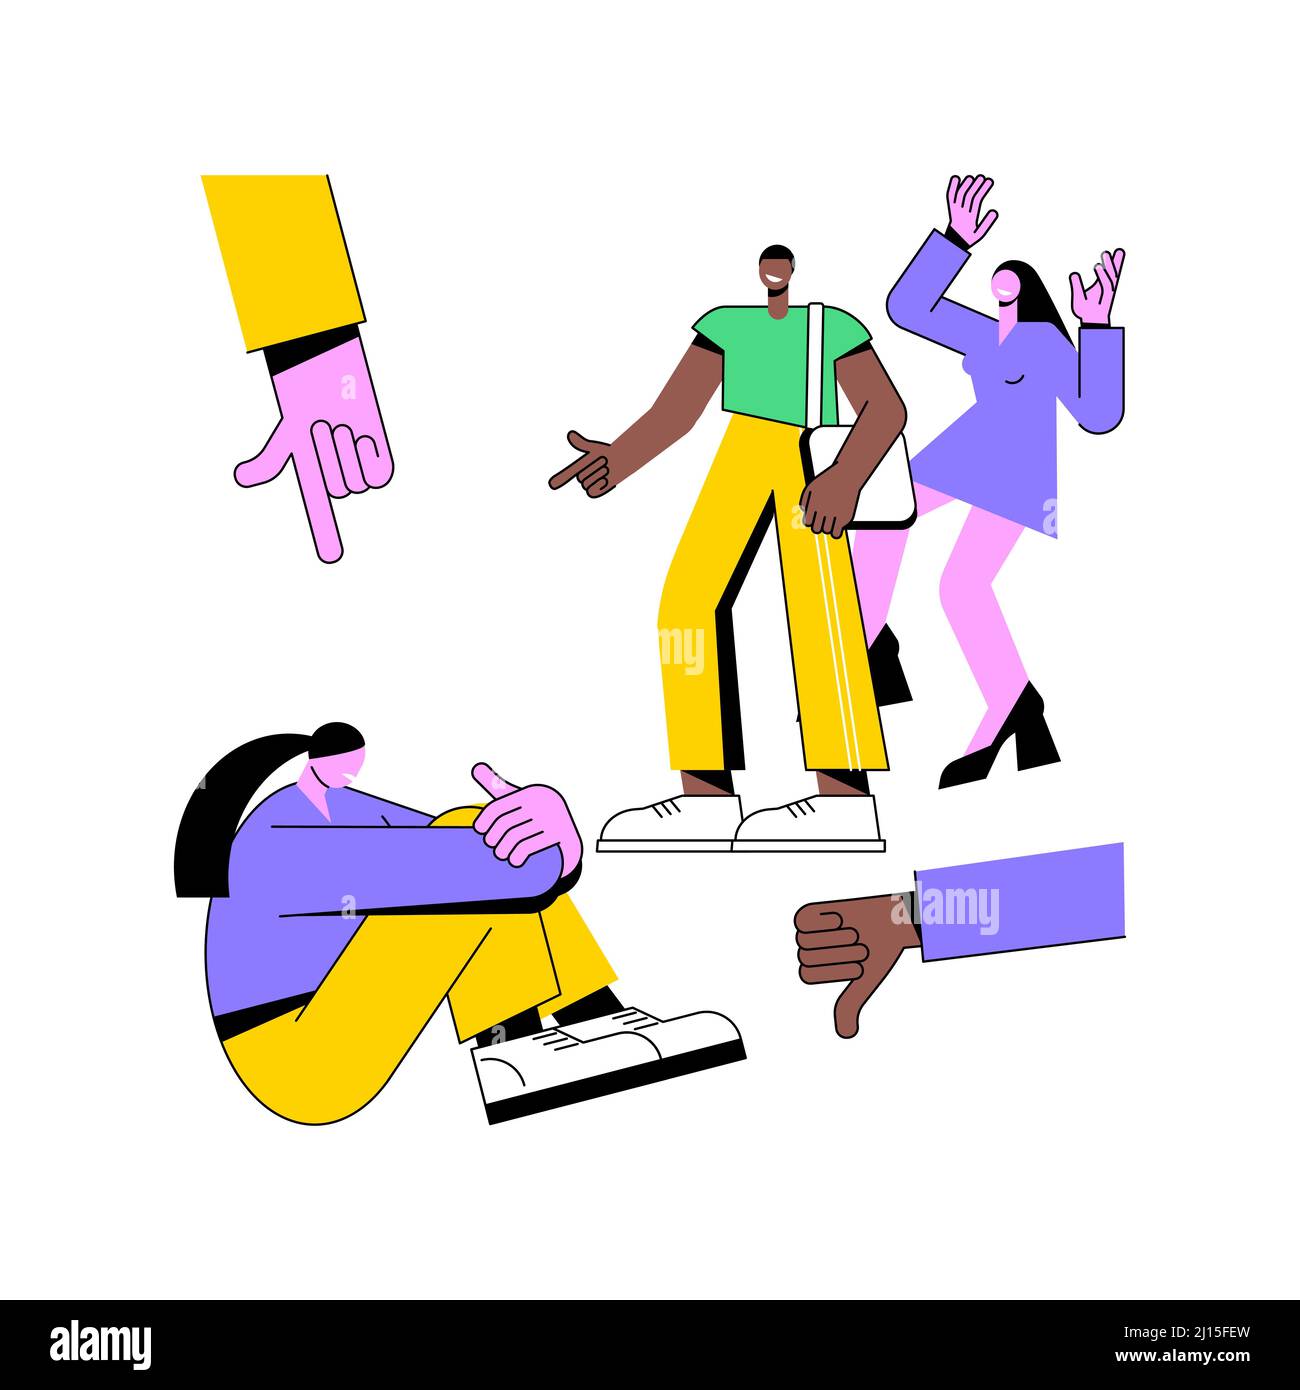 Marginalization abstract concept vector illustration. Social exclusion disadvantage, society fringe, less important, second class, gender stereotypes, school bullying, outcast abstract metaphor. Stock Vector